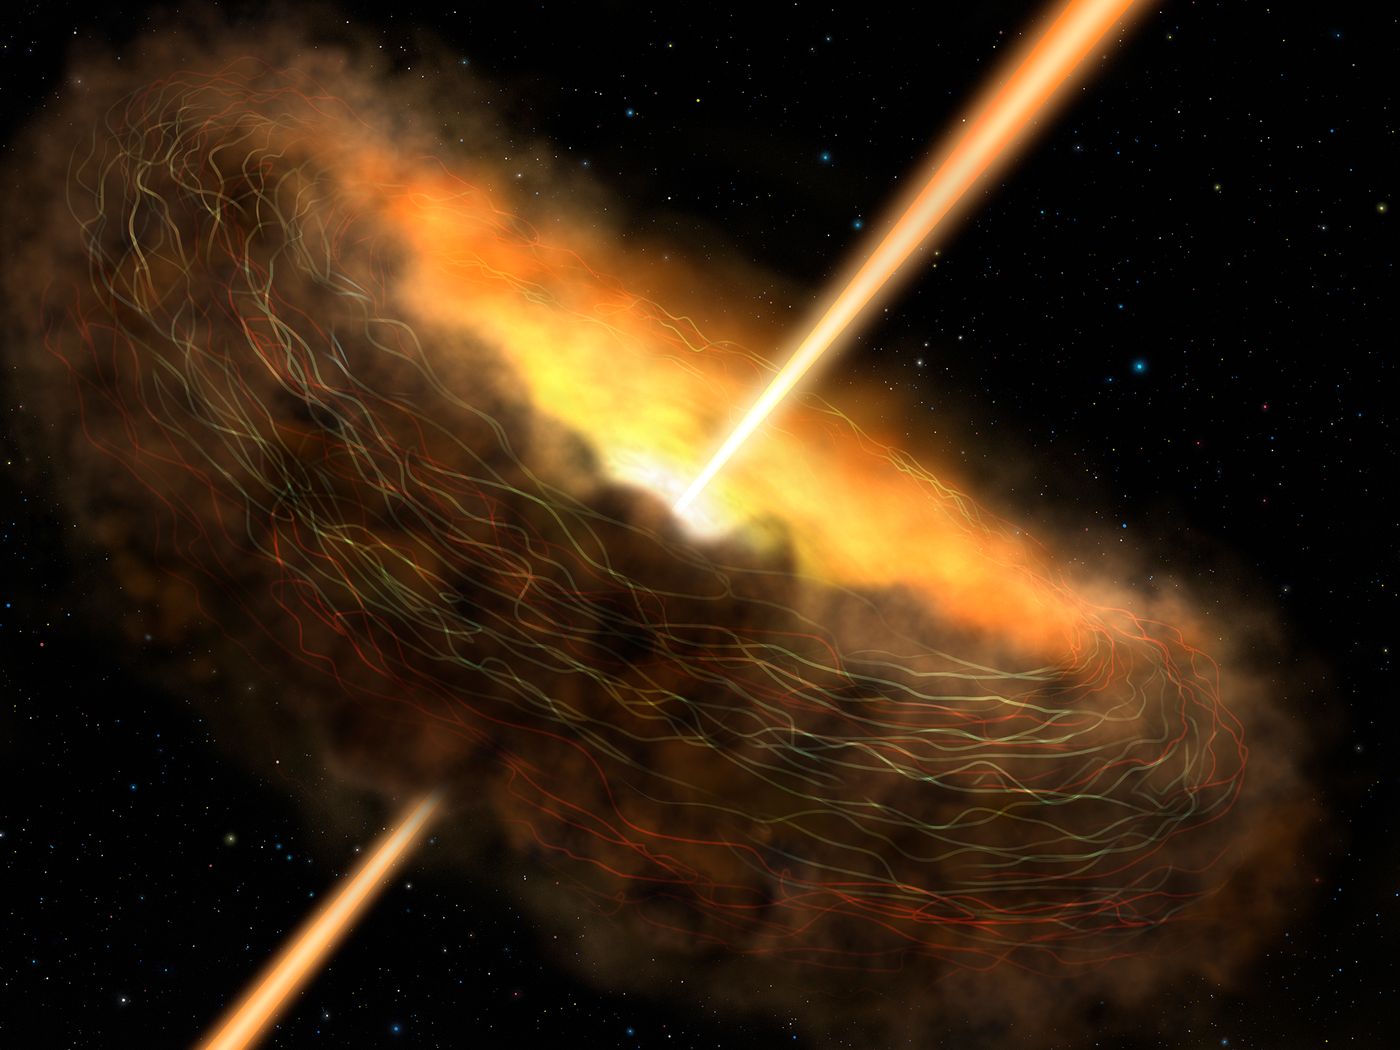 An artist's impression of a magnetic field collecting dust particulates around a supermassive black hole.